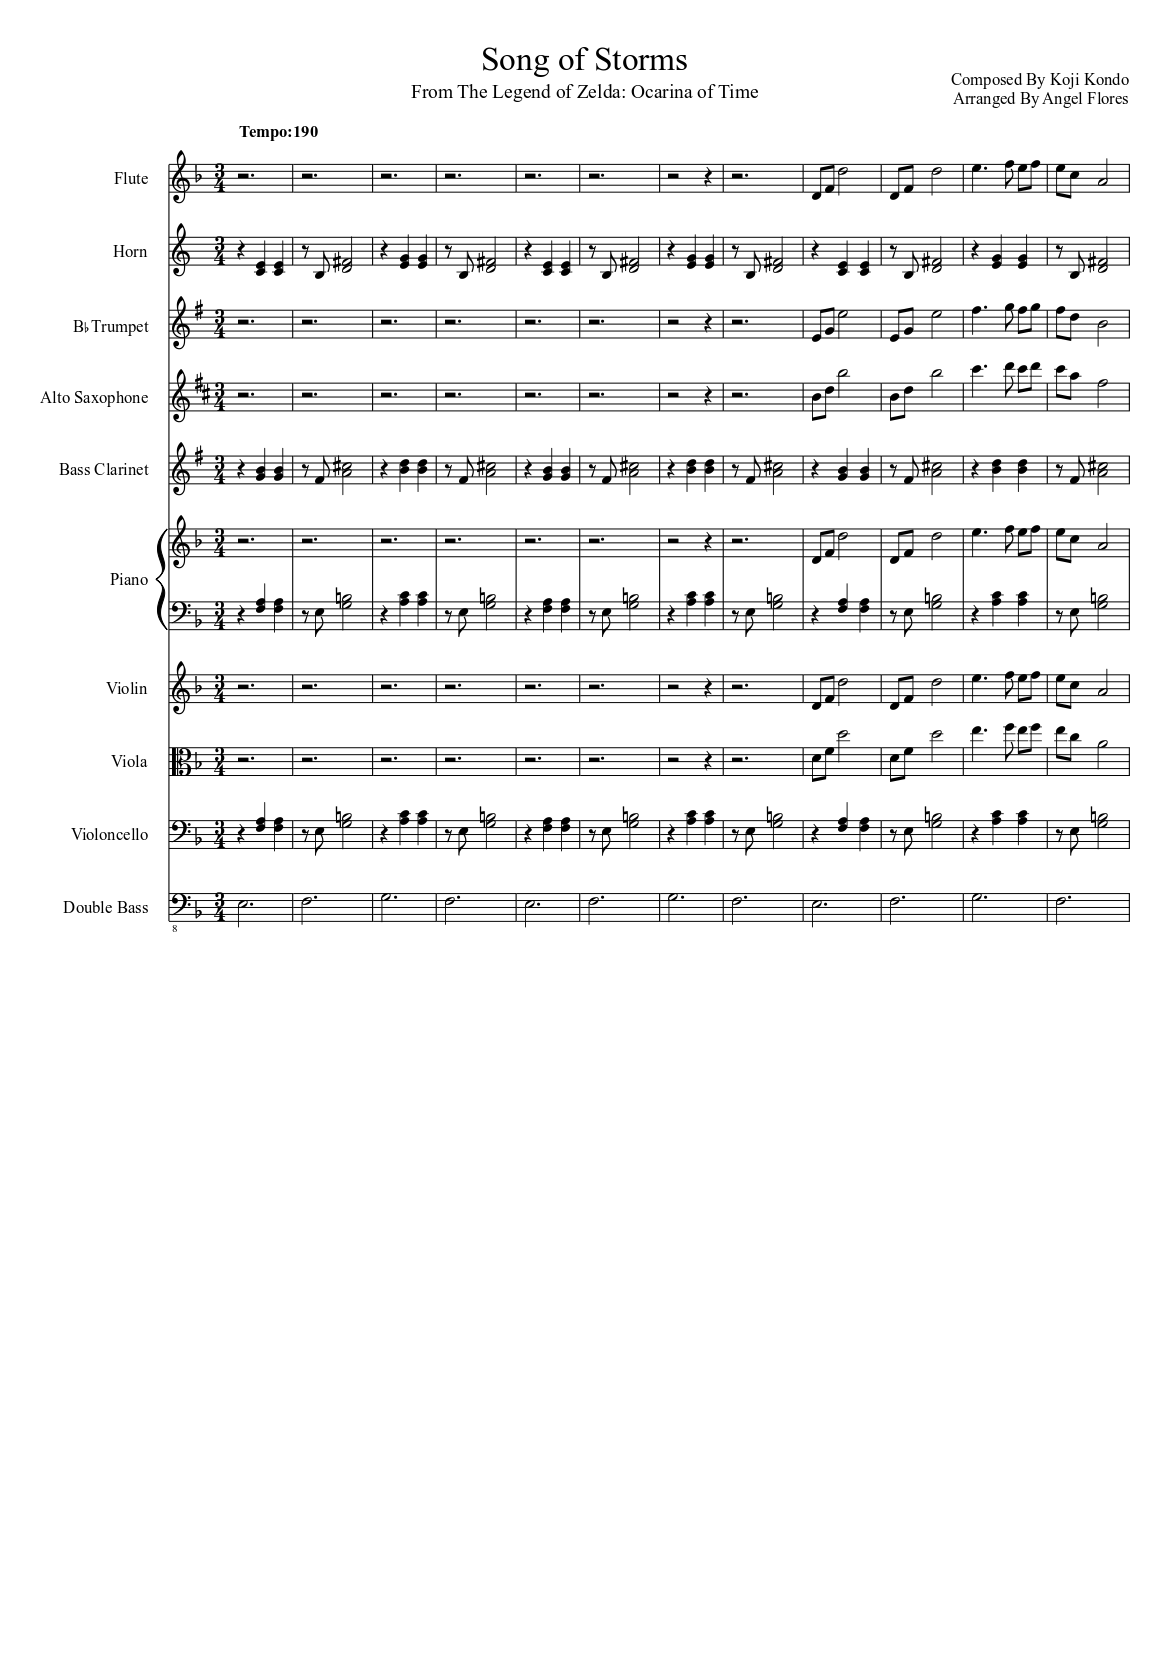 Song of Time Sheet music for Violin (Solo)